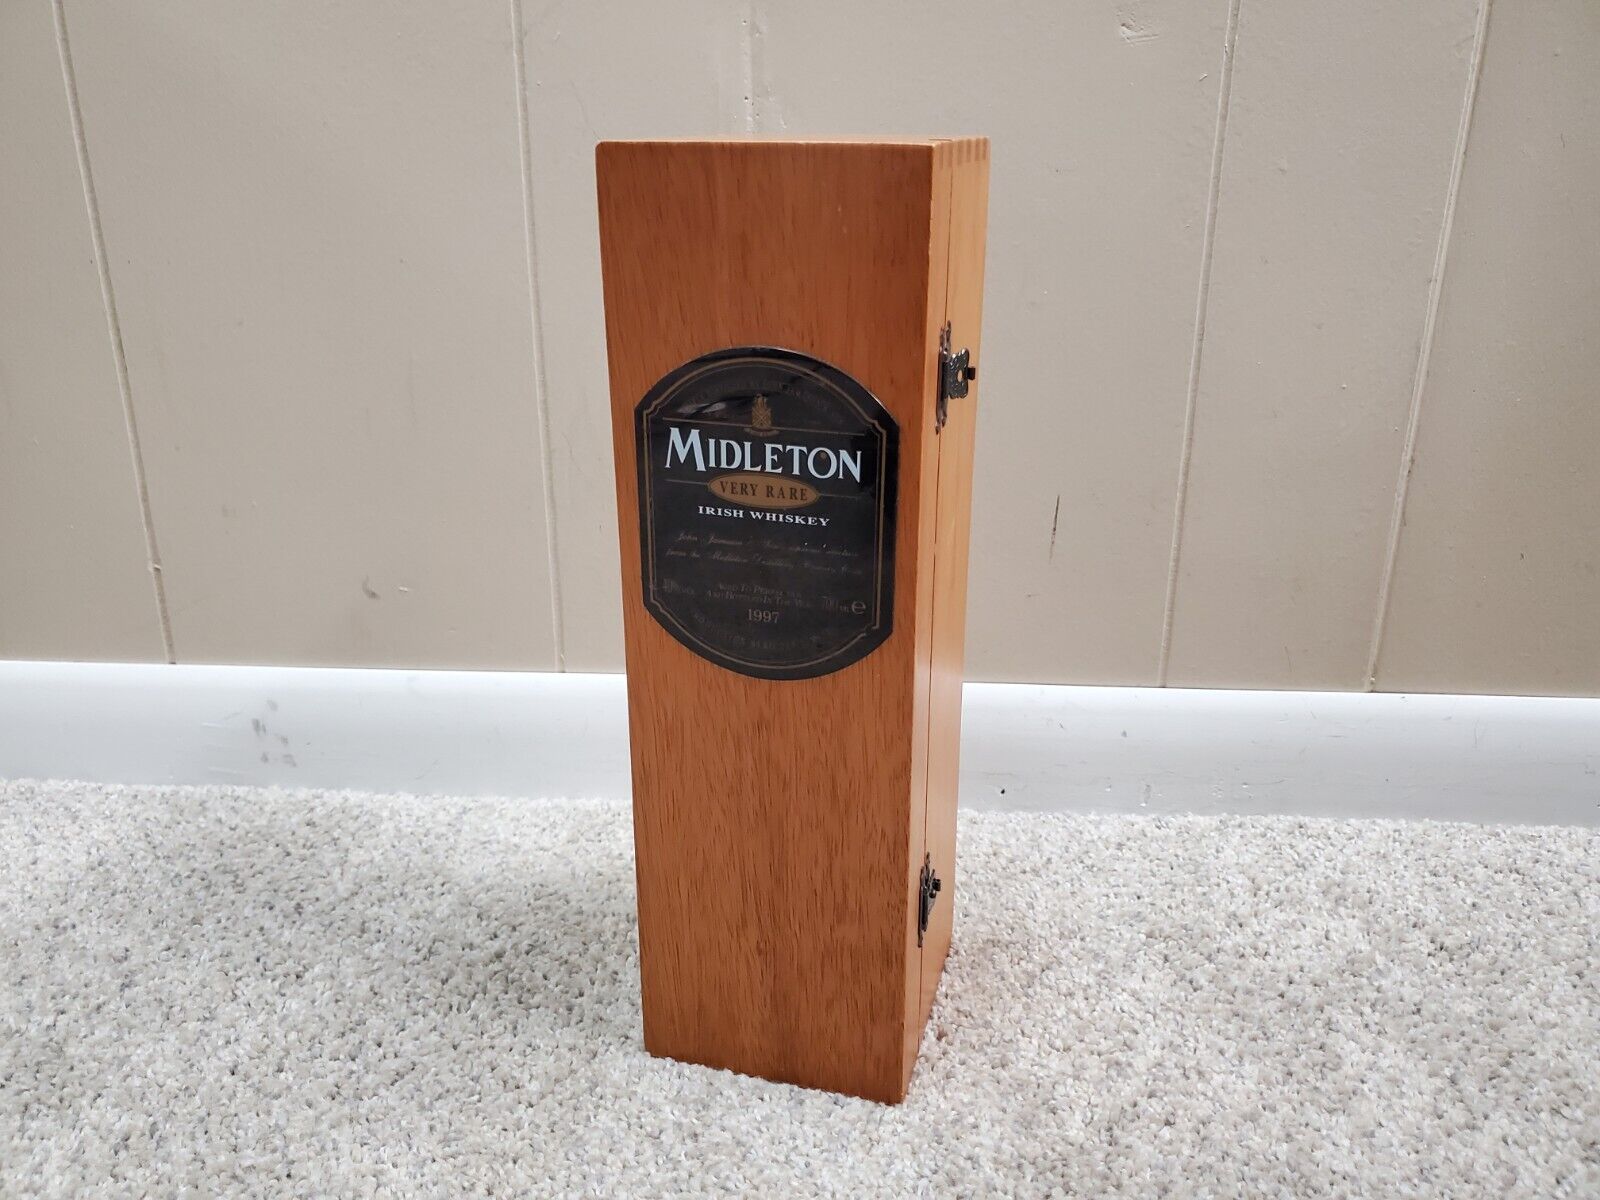 Midleton Very Rare Whiskey Vintage Release Collectible Box 1997